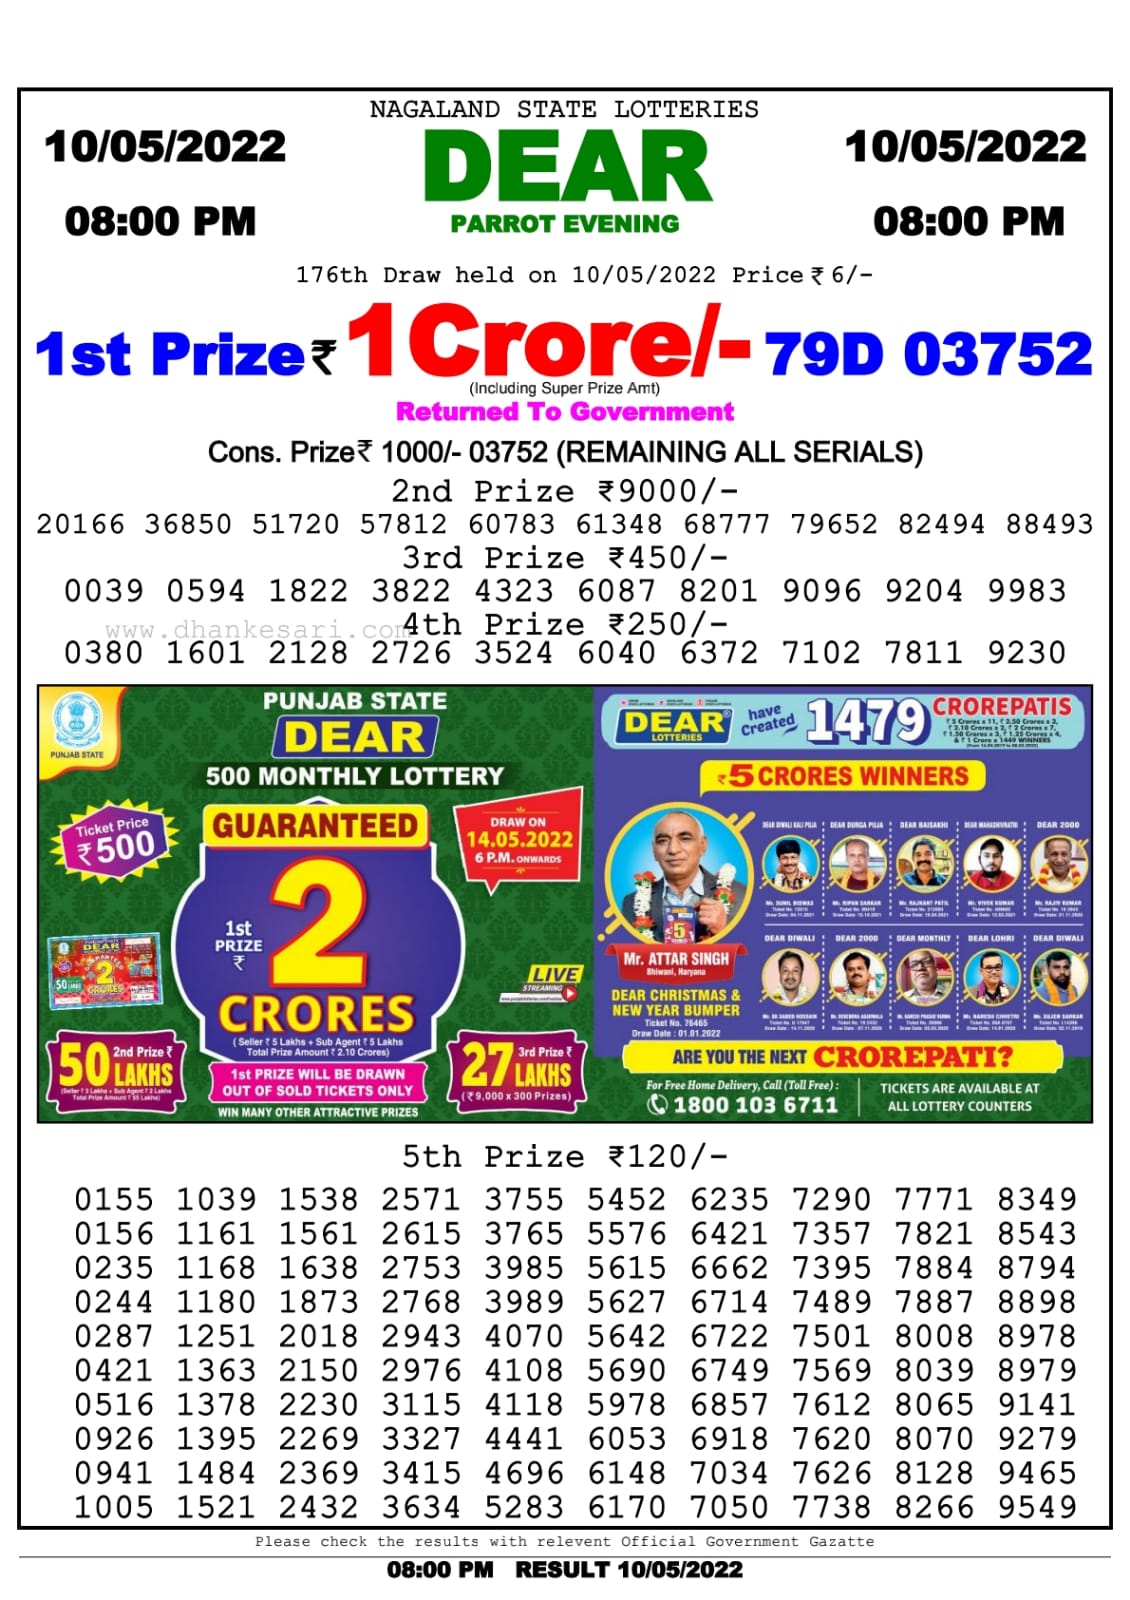 Dear Lottery Nagaland state Lottery Results 08.00 pm 10.05.2022